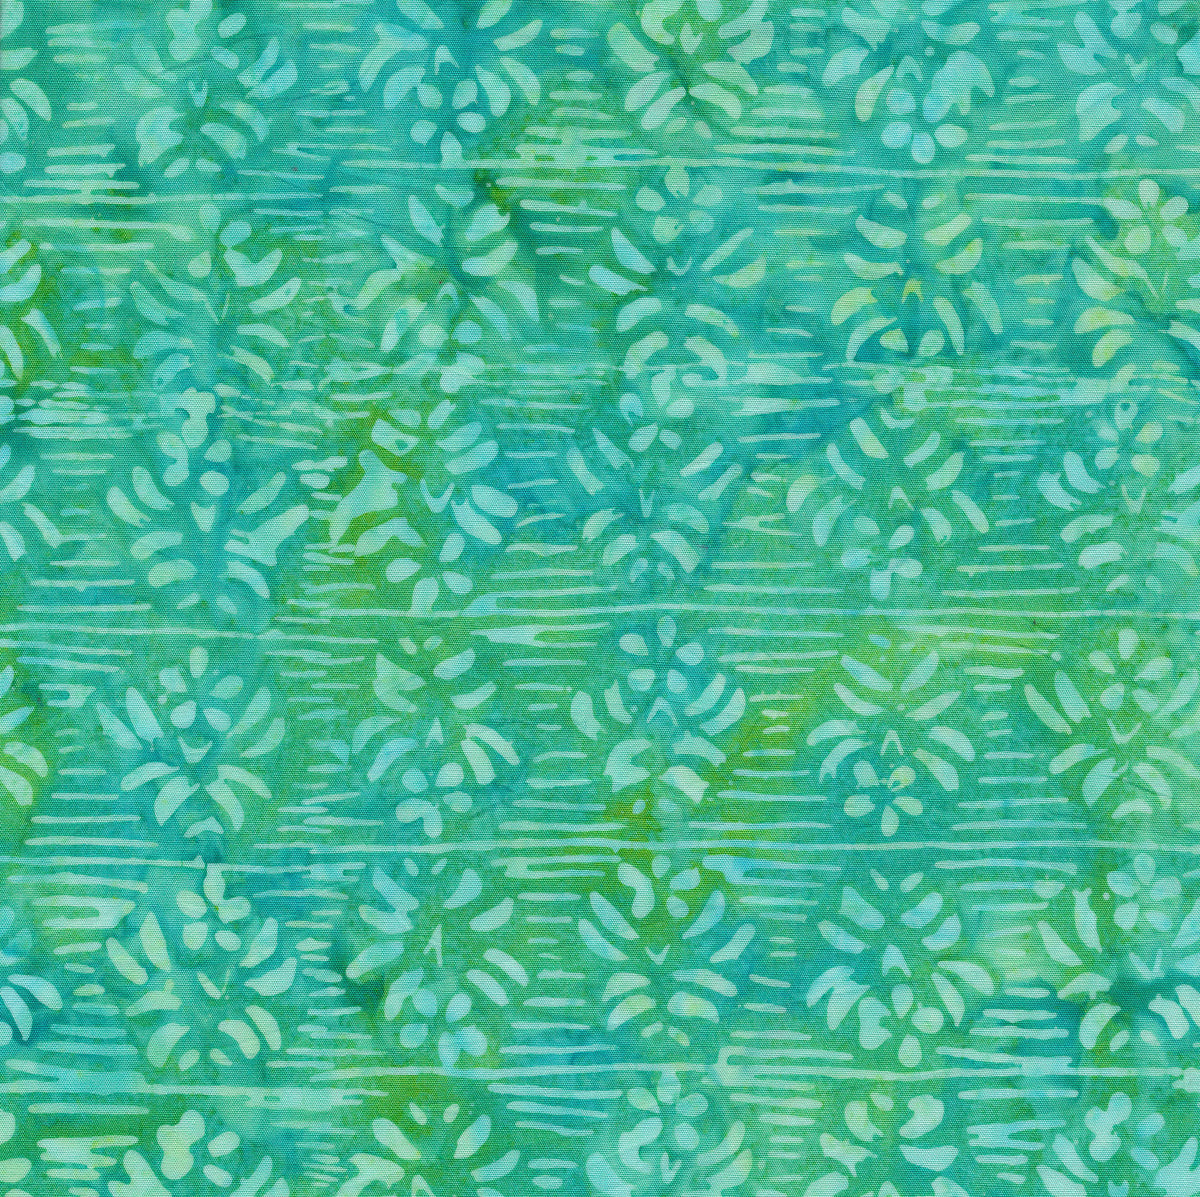 Majestic Batiks Quilt Fabric - Banks Flowers in Green - Banks-332